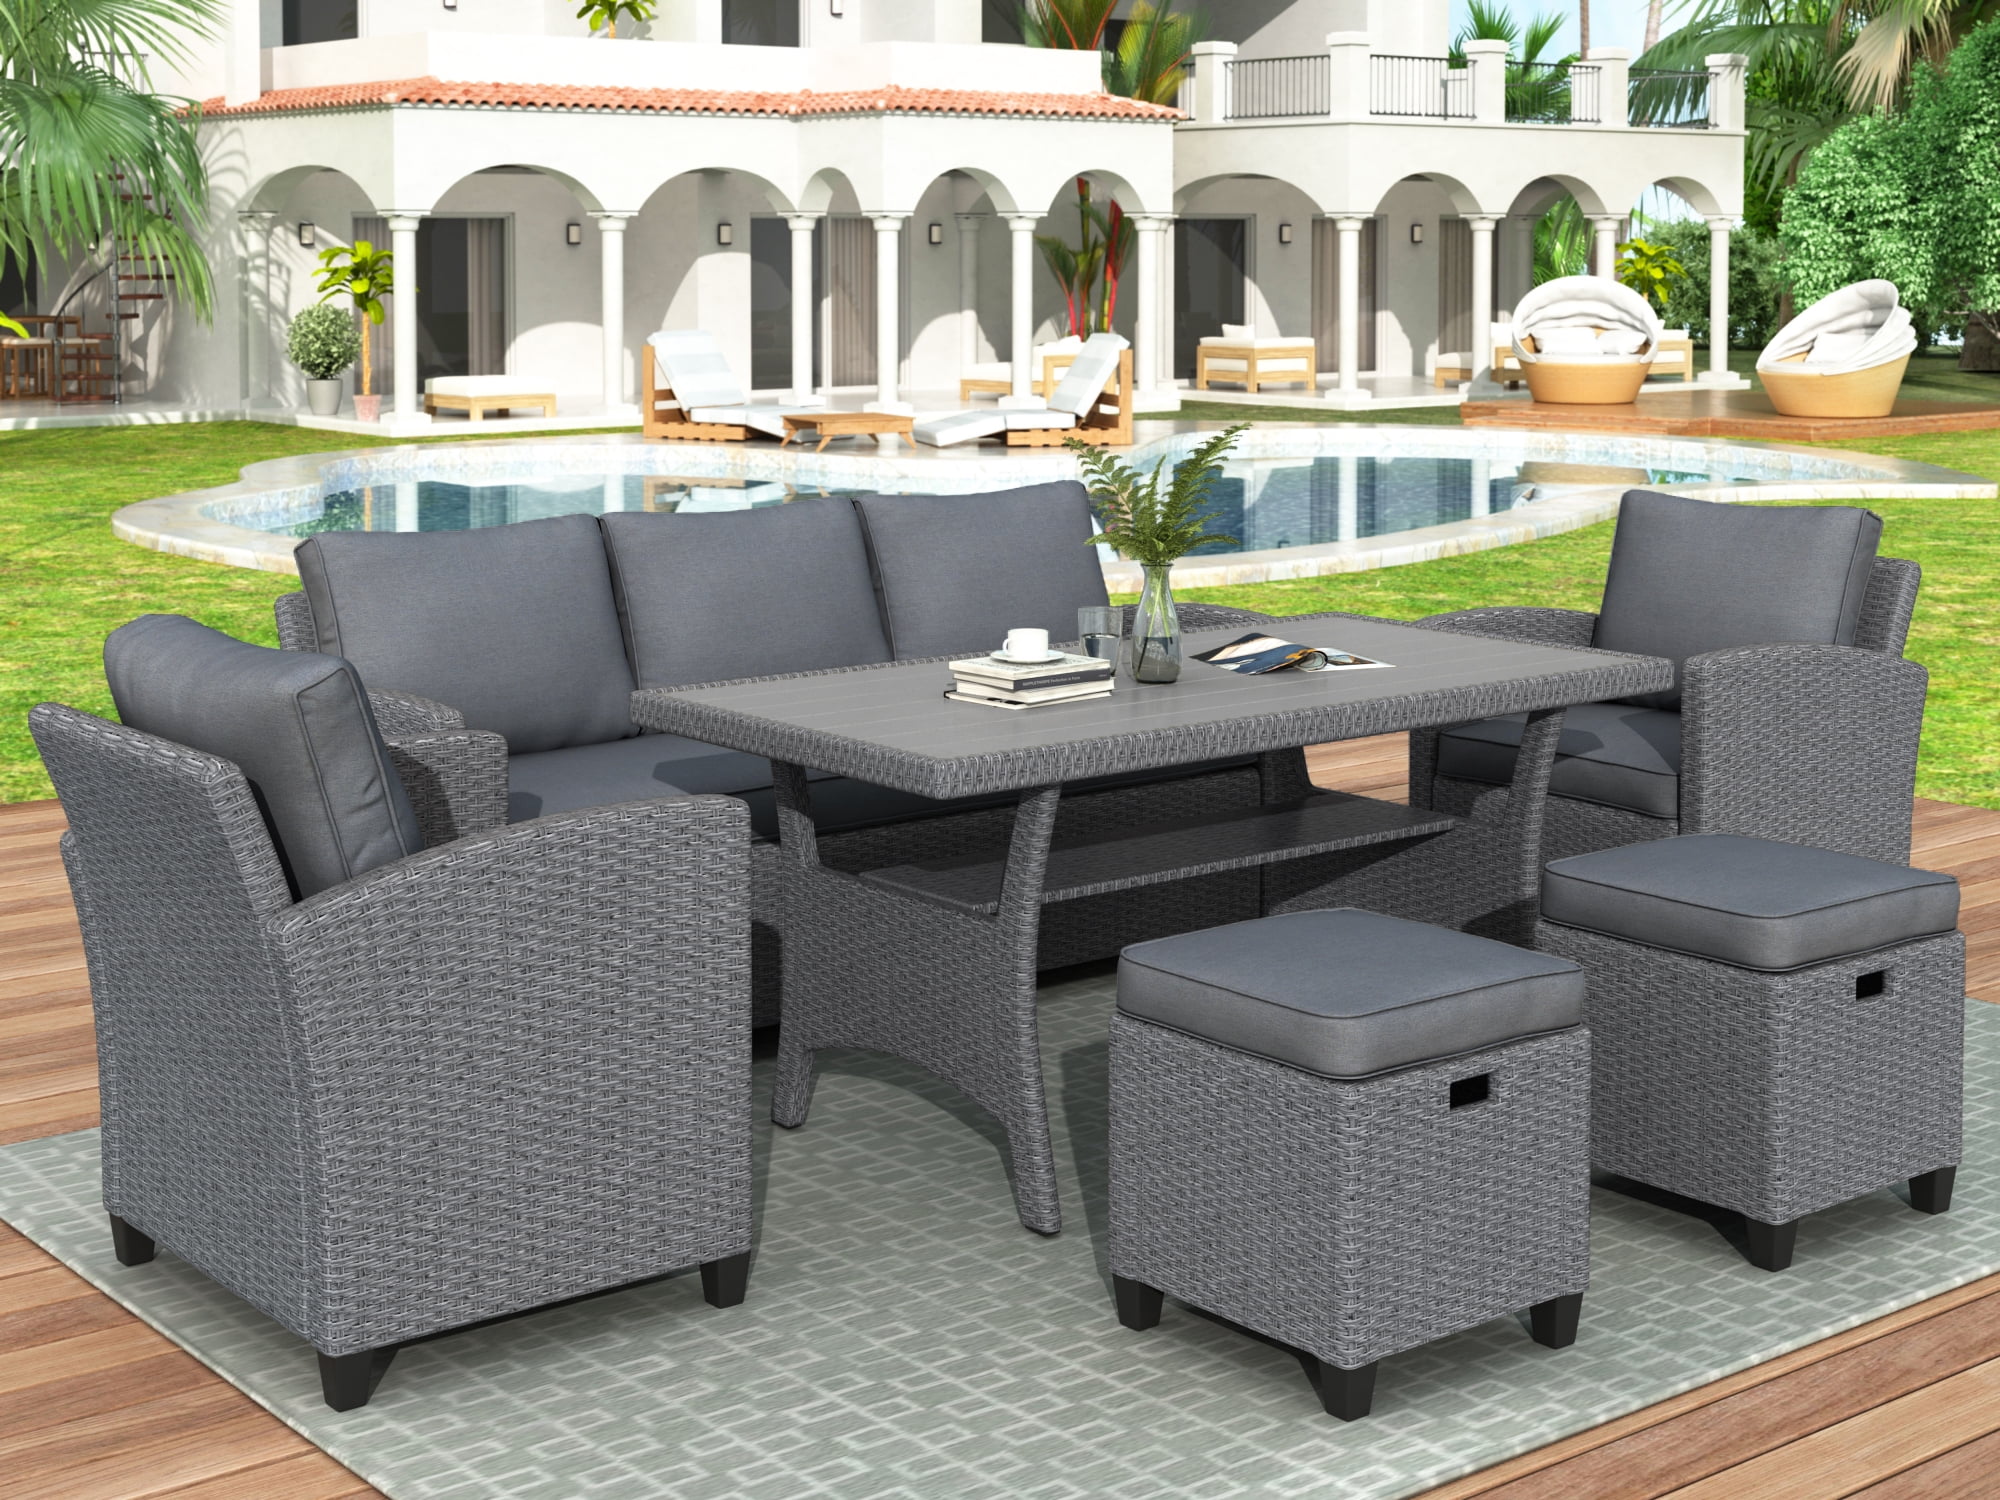 Patio Dining Room Sets On Sale